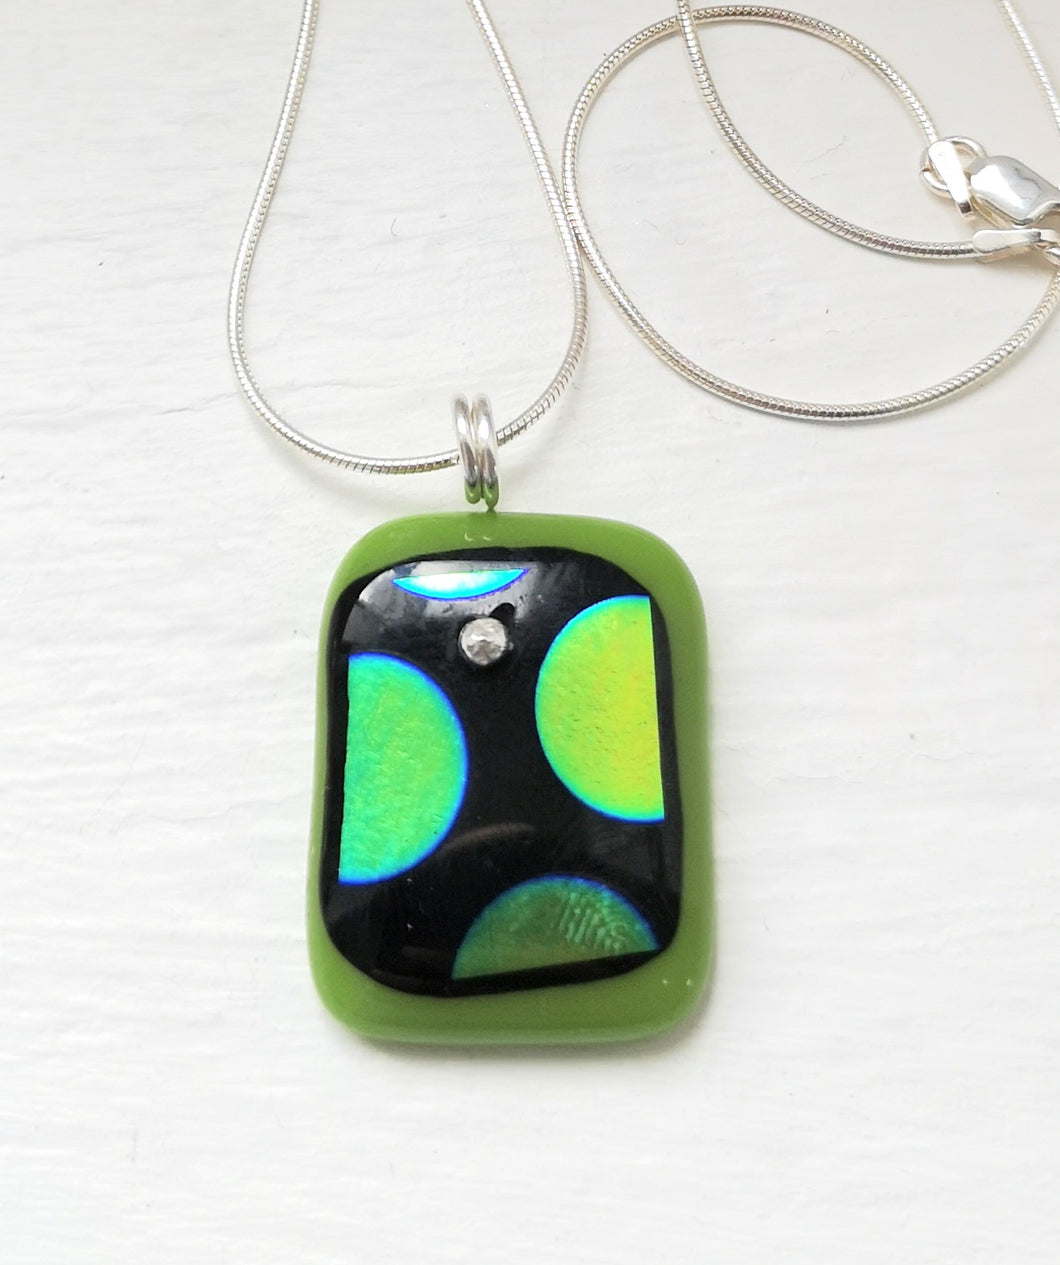 Green Polkadot Dichroic glass pendant with handmade silver fittings & silver snake chain